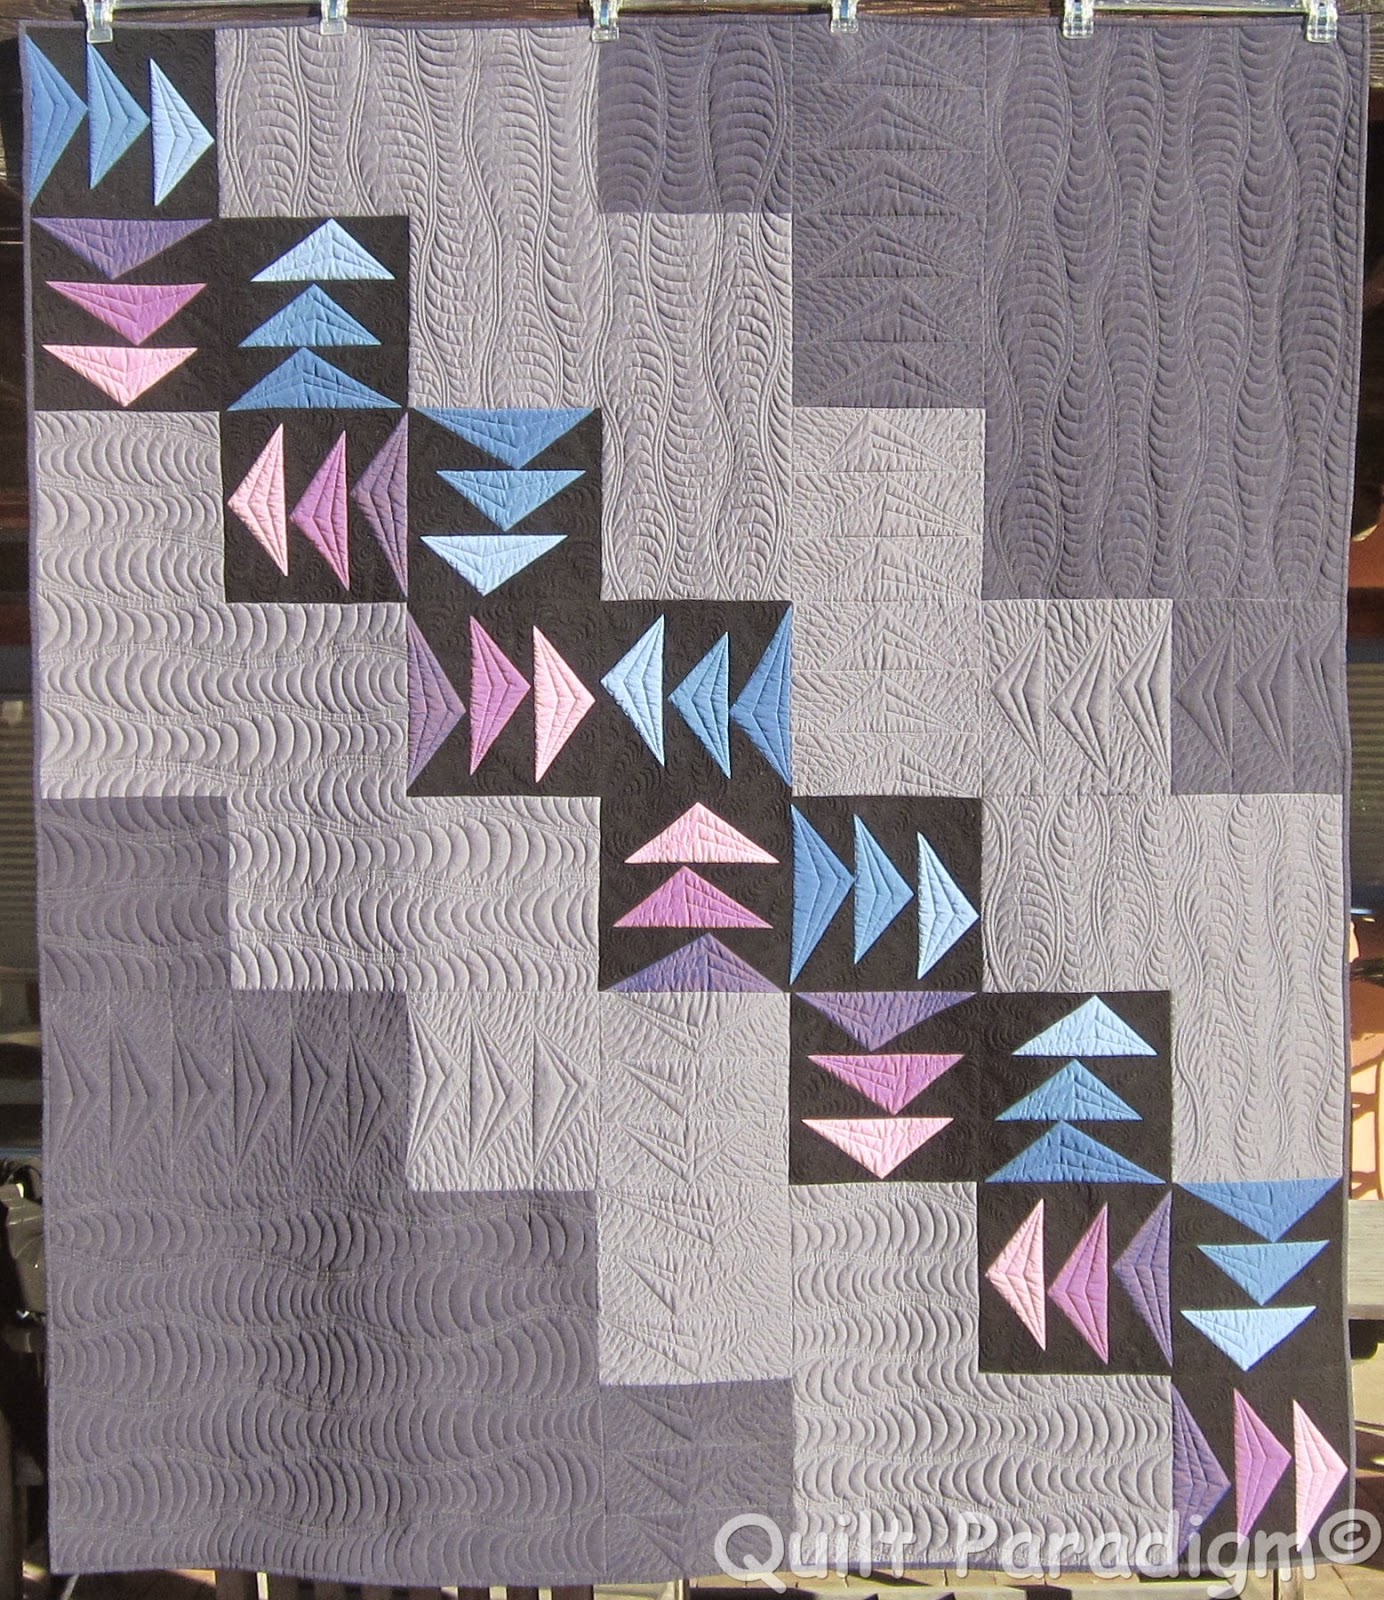 http://quiltparadigm.blogspot.com/2014/11/off-course-done-and-dusted.html